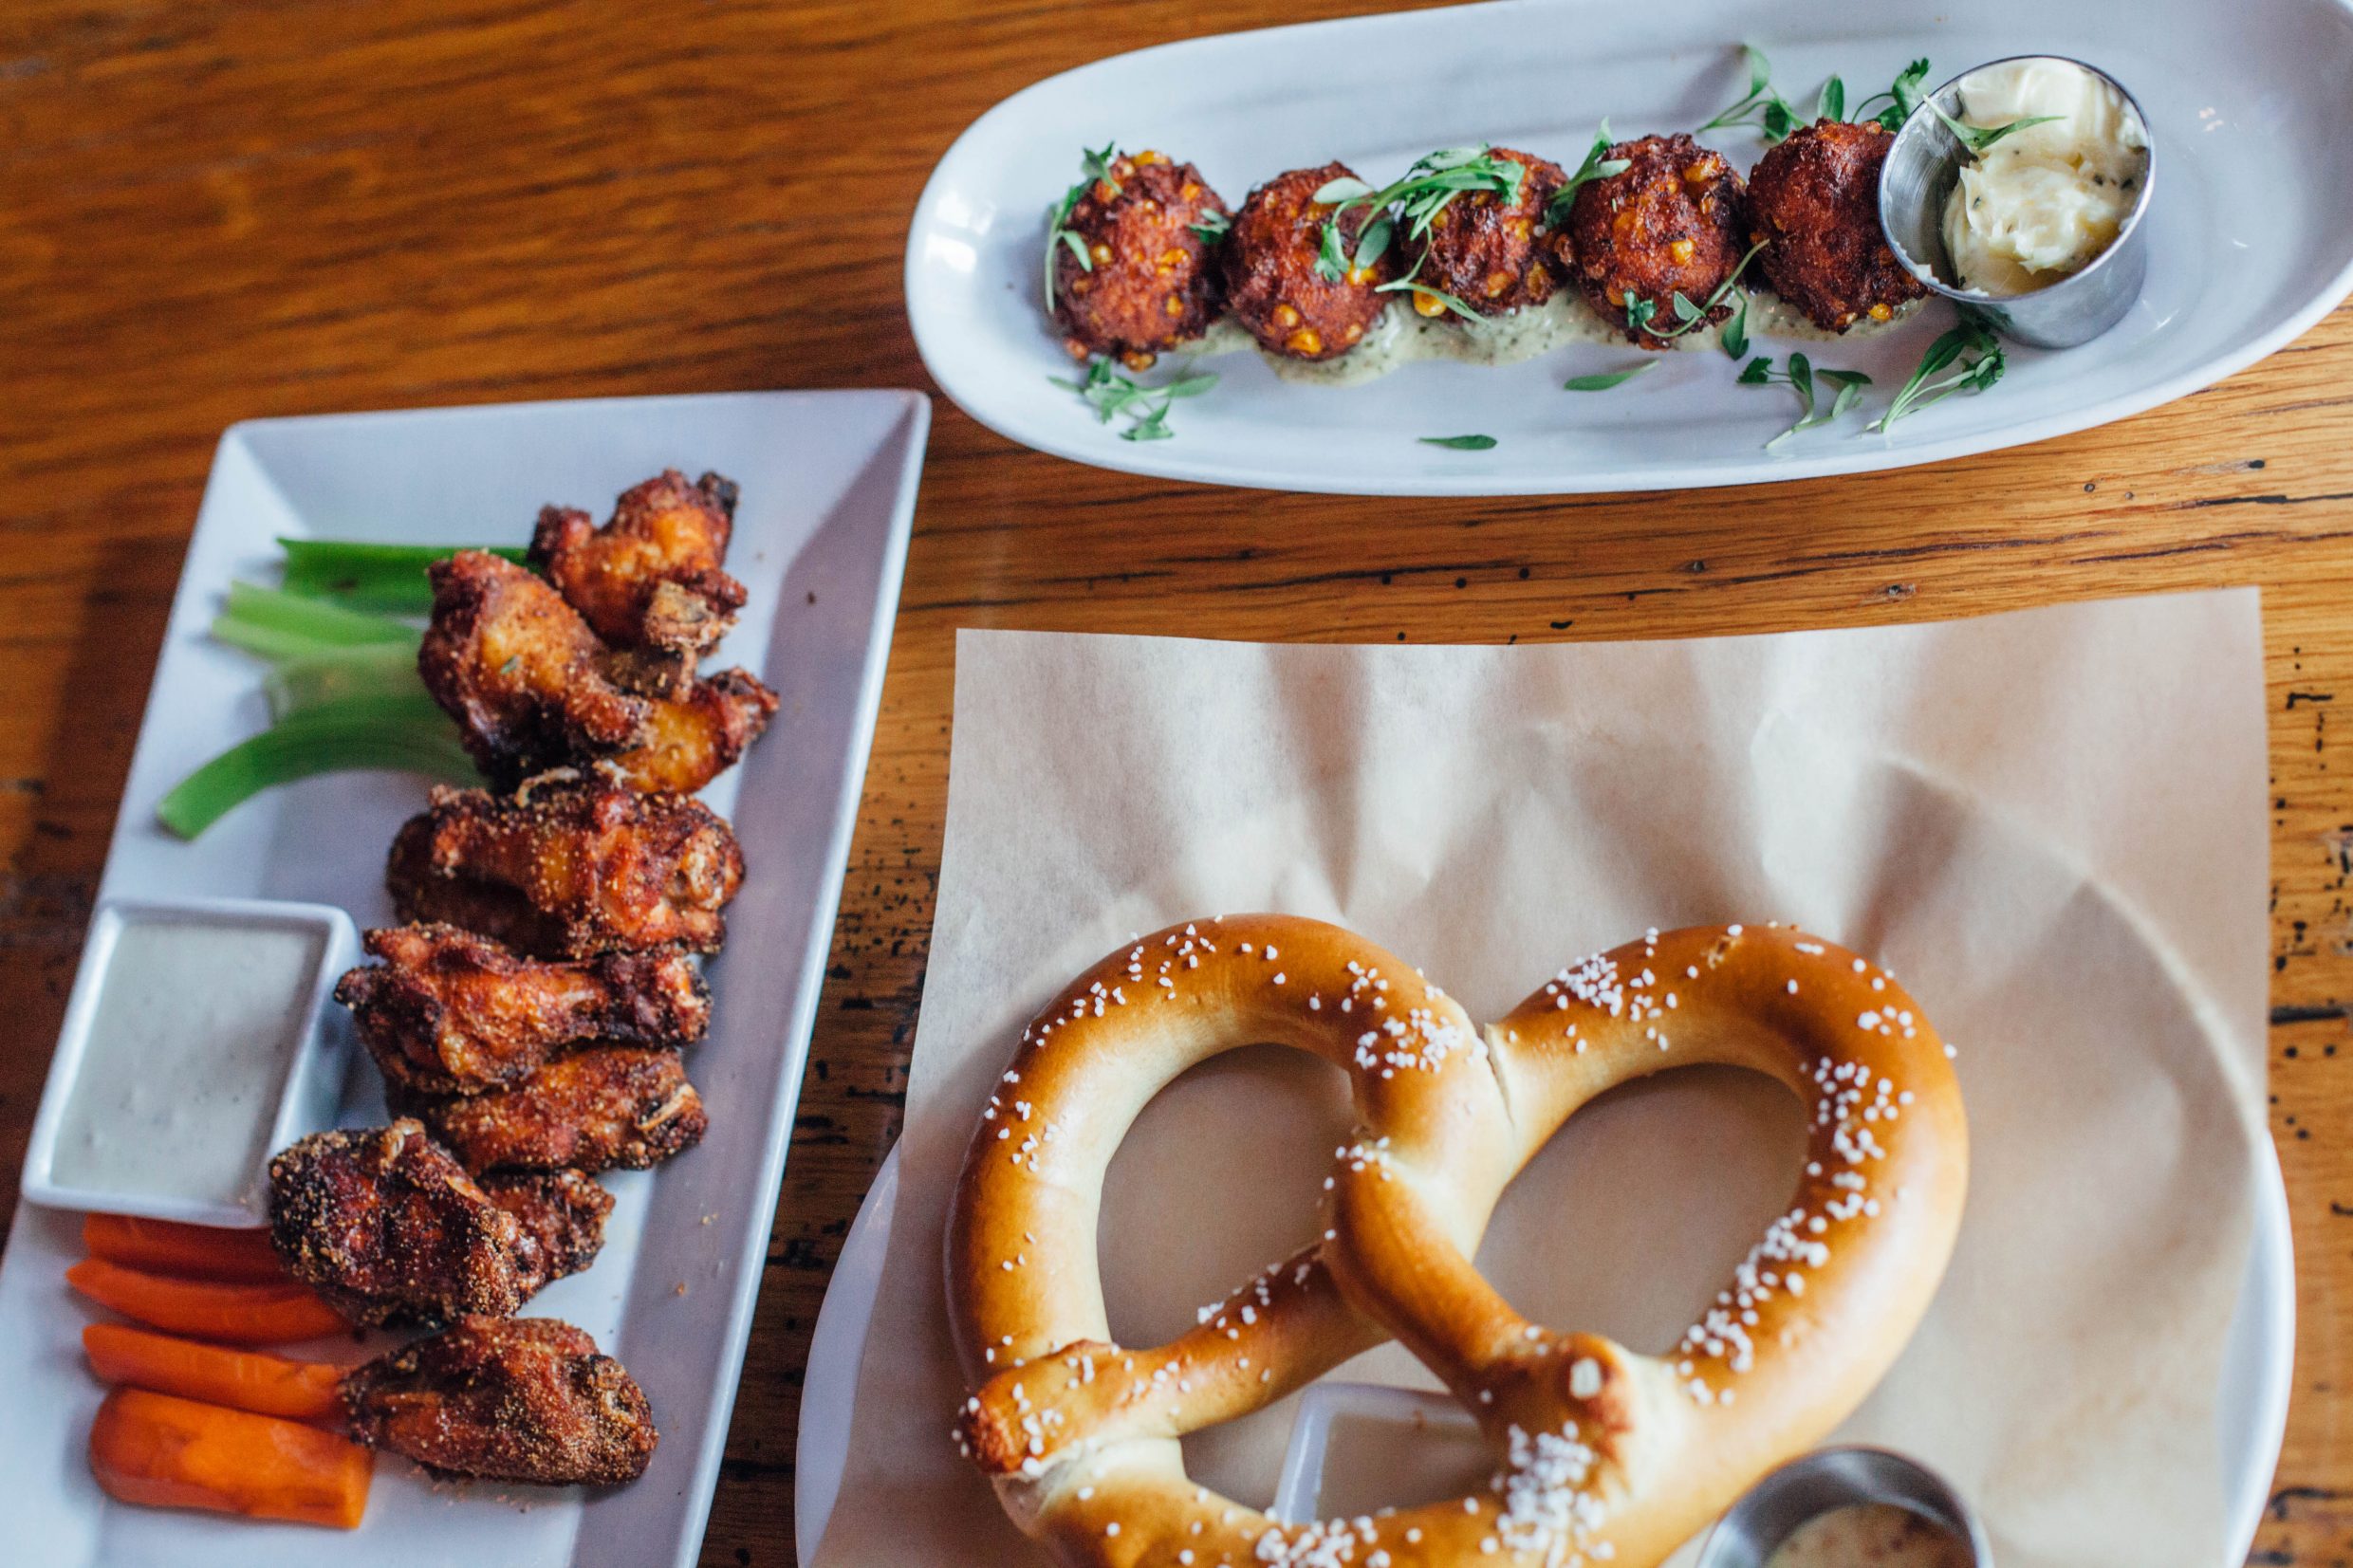 City Tap House 10 Spice Wings, Corn & Crab Hushpuppies | A weekend in Washington, D.C. | Travel and Food Guide